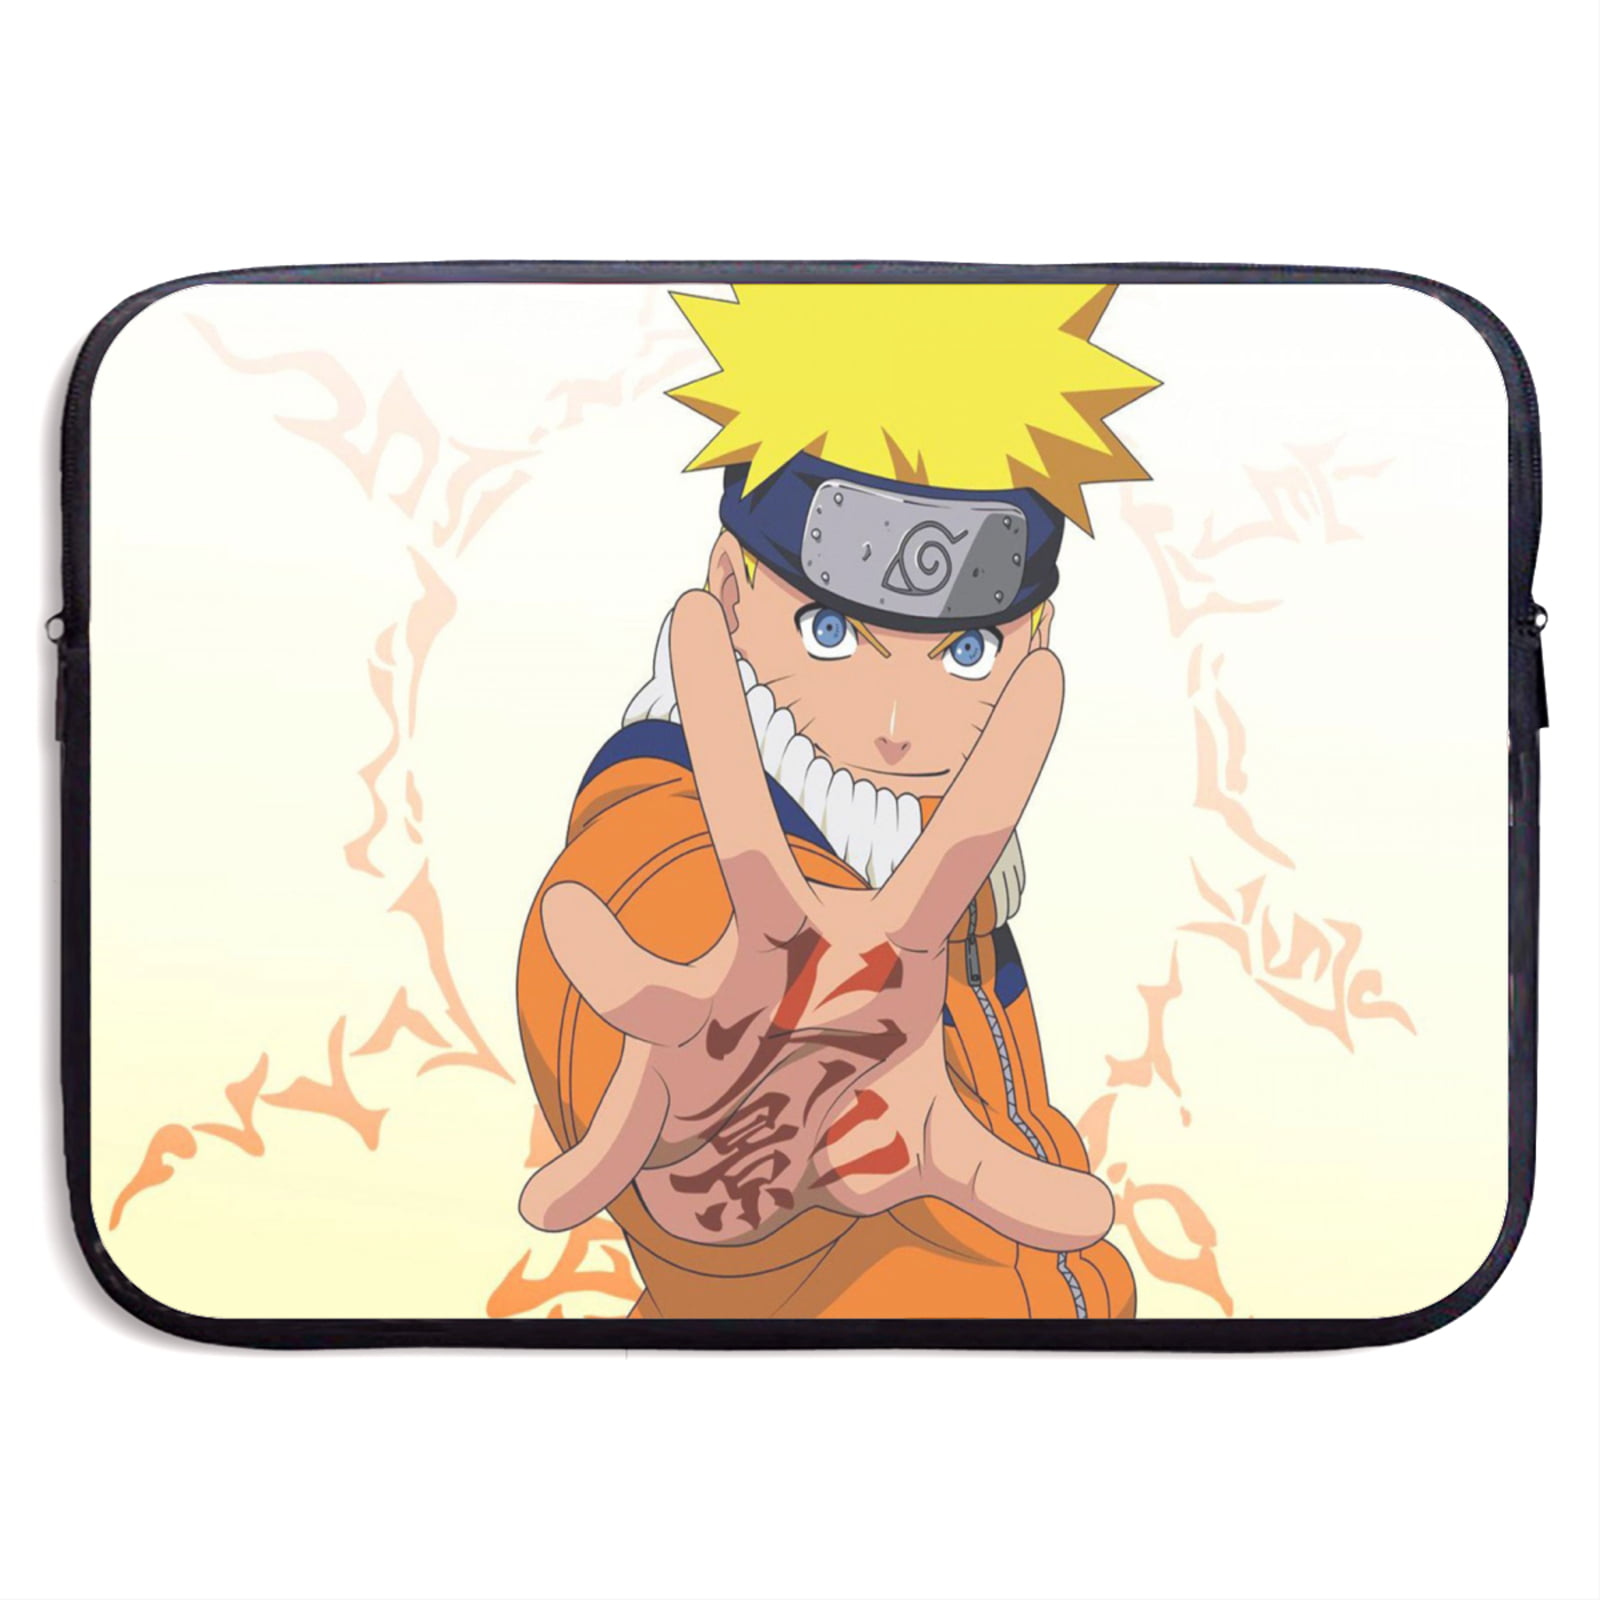 Waterproof Notebook Computer Bag-Light and Comfortable Tablet Briefcase-Band Zipper Portable Handbag 13 Inch Anime Naruto 13-Inch to 15-Inch Laptop Sleeve Case